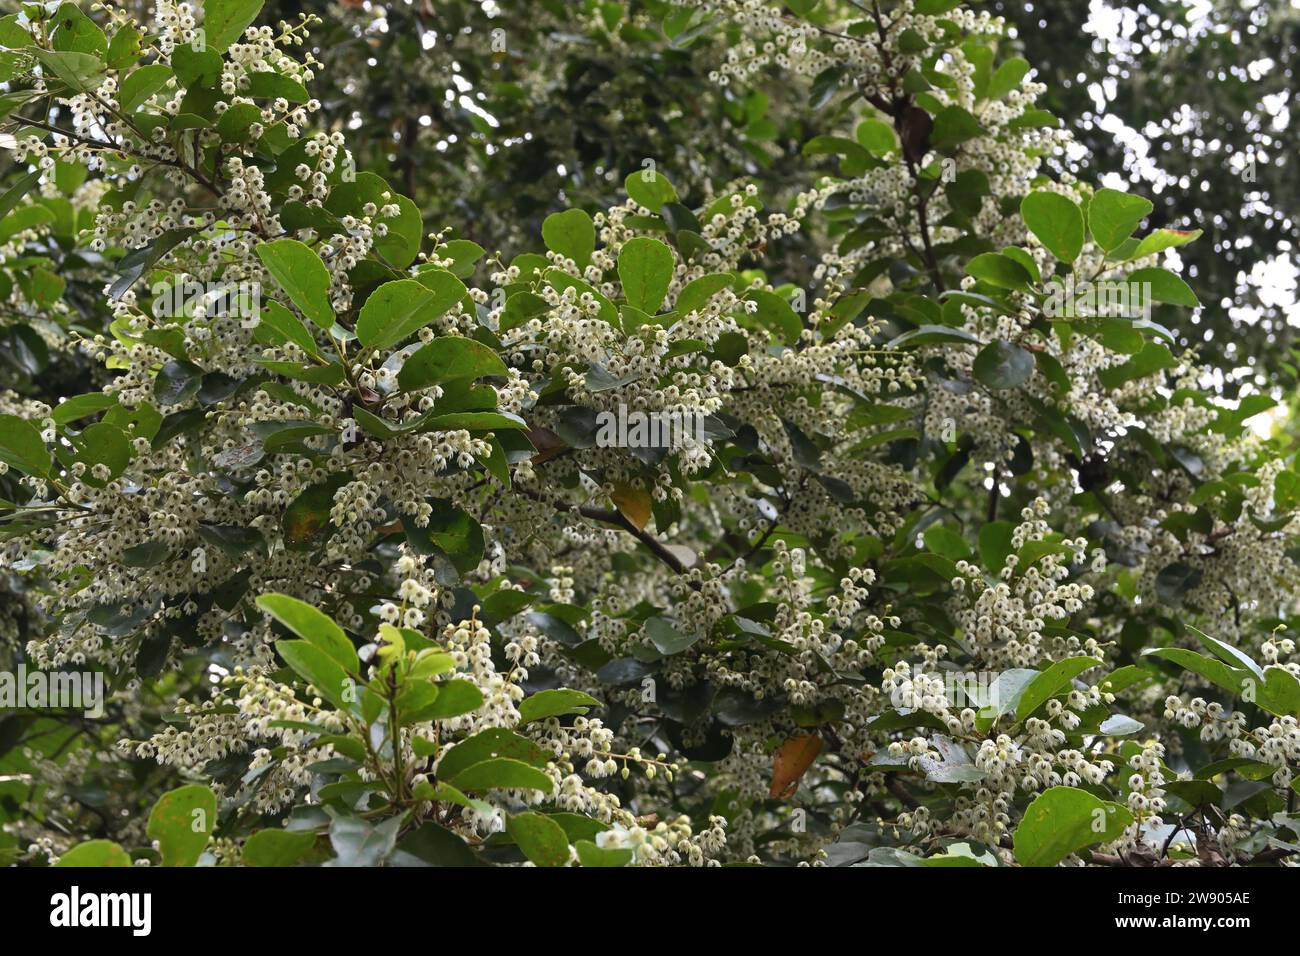 A view of the many small flowers that are blooming on the branches of a Ceylon olive tree (Elaeocarpus Serratus) Stock Photo